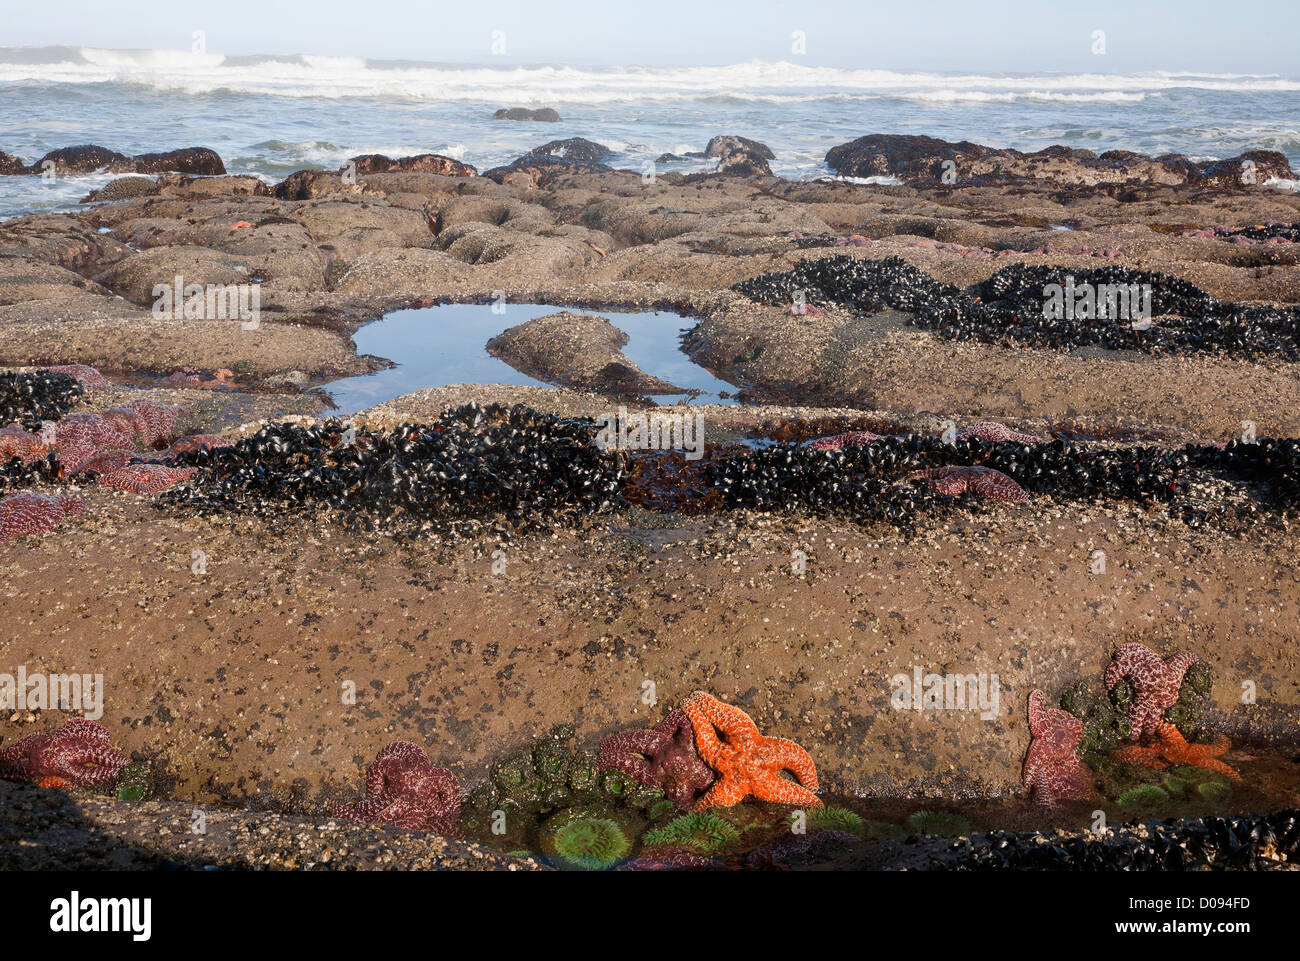 WASHINGTON - Mussels, Ochre Sea Stars and Anemones on exposed rocks off Beach 4 when the tide is out in Olympic National Park. Stock Photo